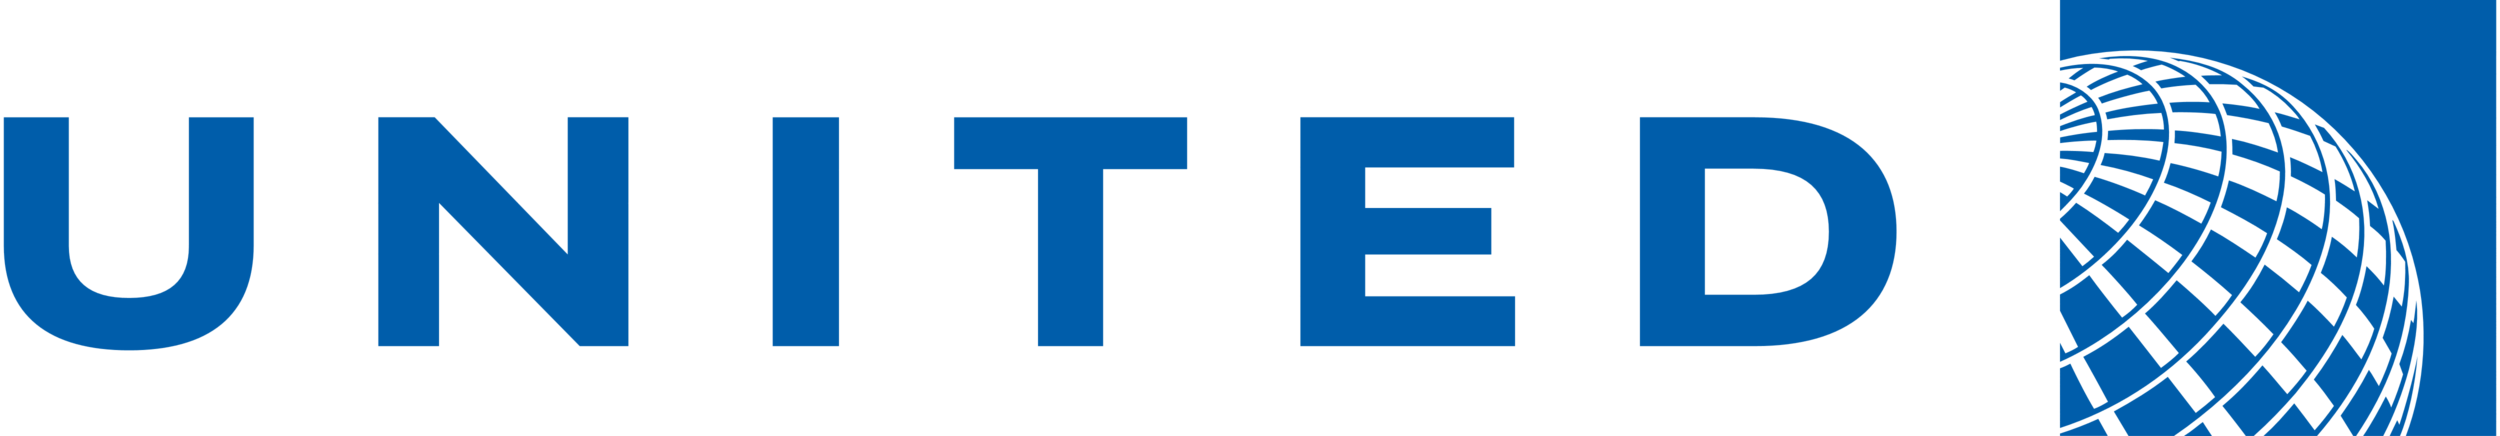 United_Airlines_logo_logotype.png